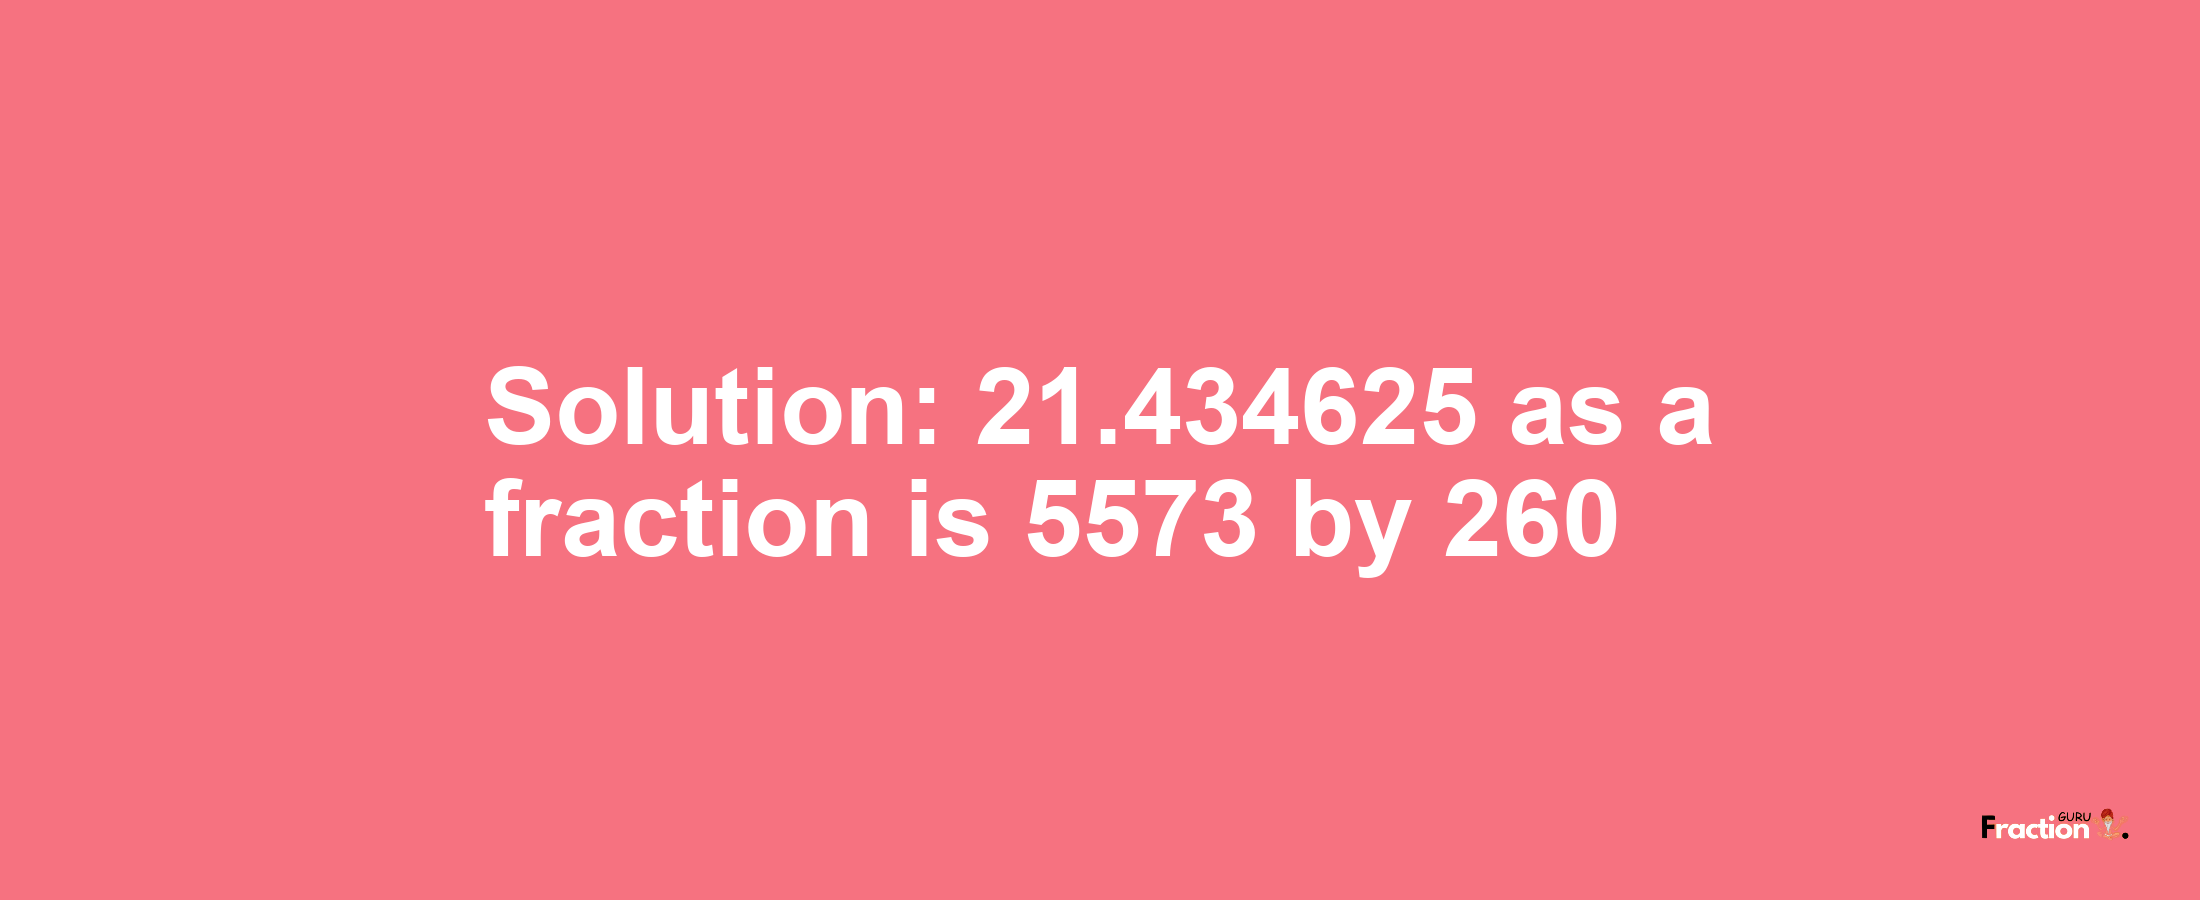 Solution:21.434625 as a fraction is 5573/260